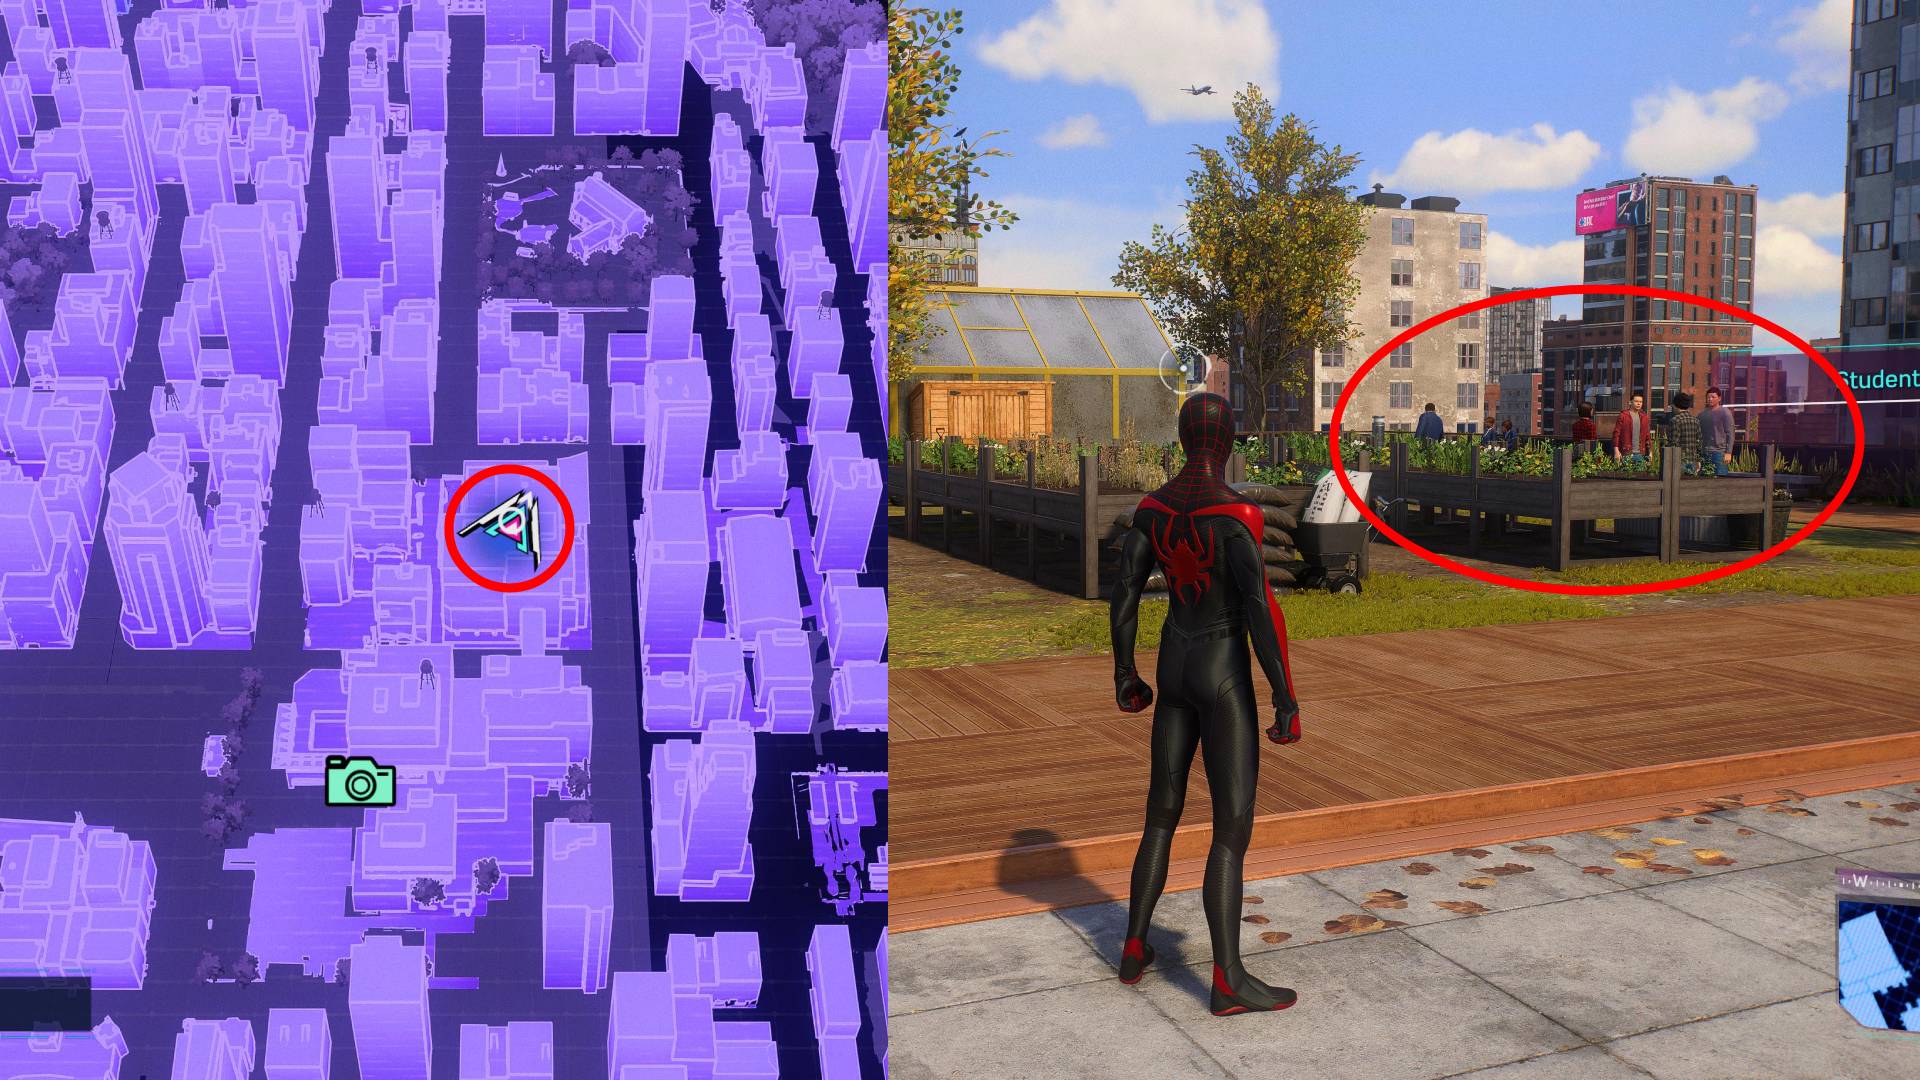 The location of the Greenhouse Club in Marvel's Spider-Man 2